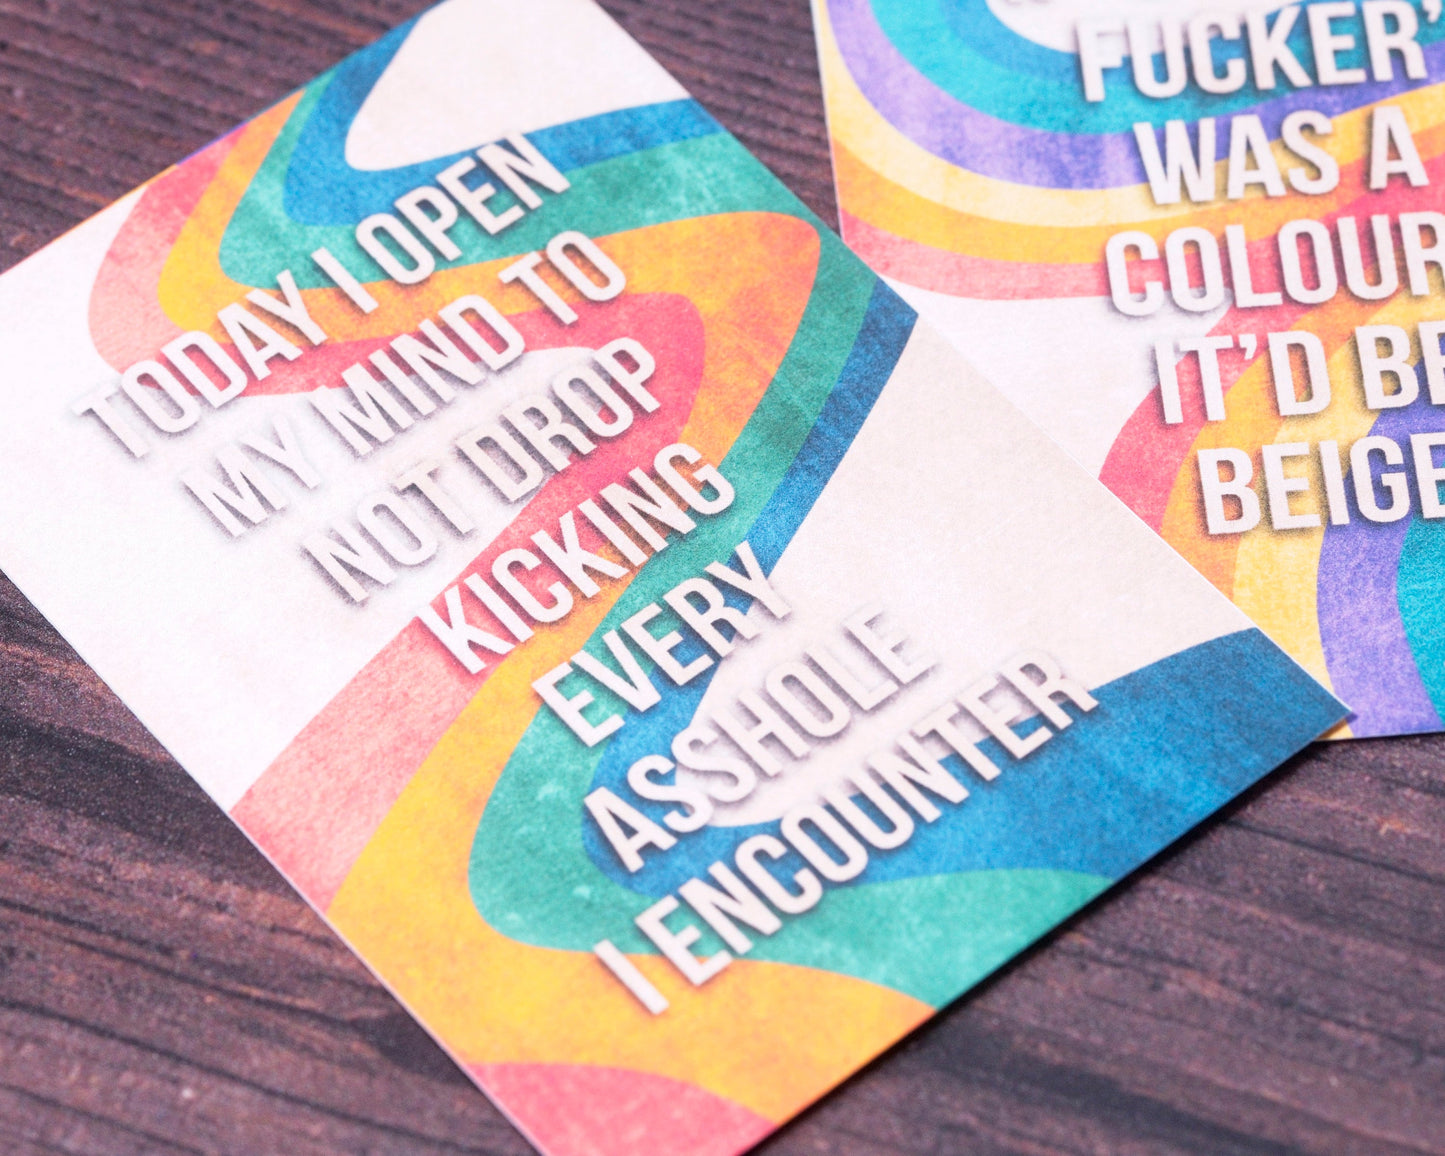 The Sweary Affirmation Shop - Mini Sweary Affirmation Deck | Funny Pride Cards | LGBTQIA+ Gift